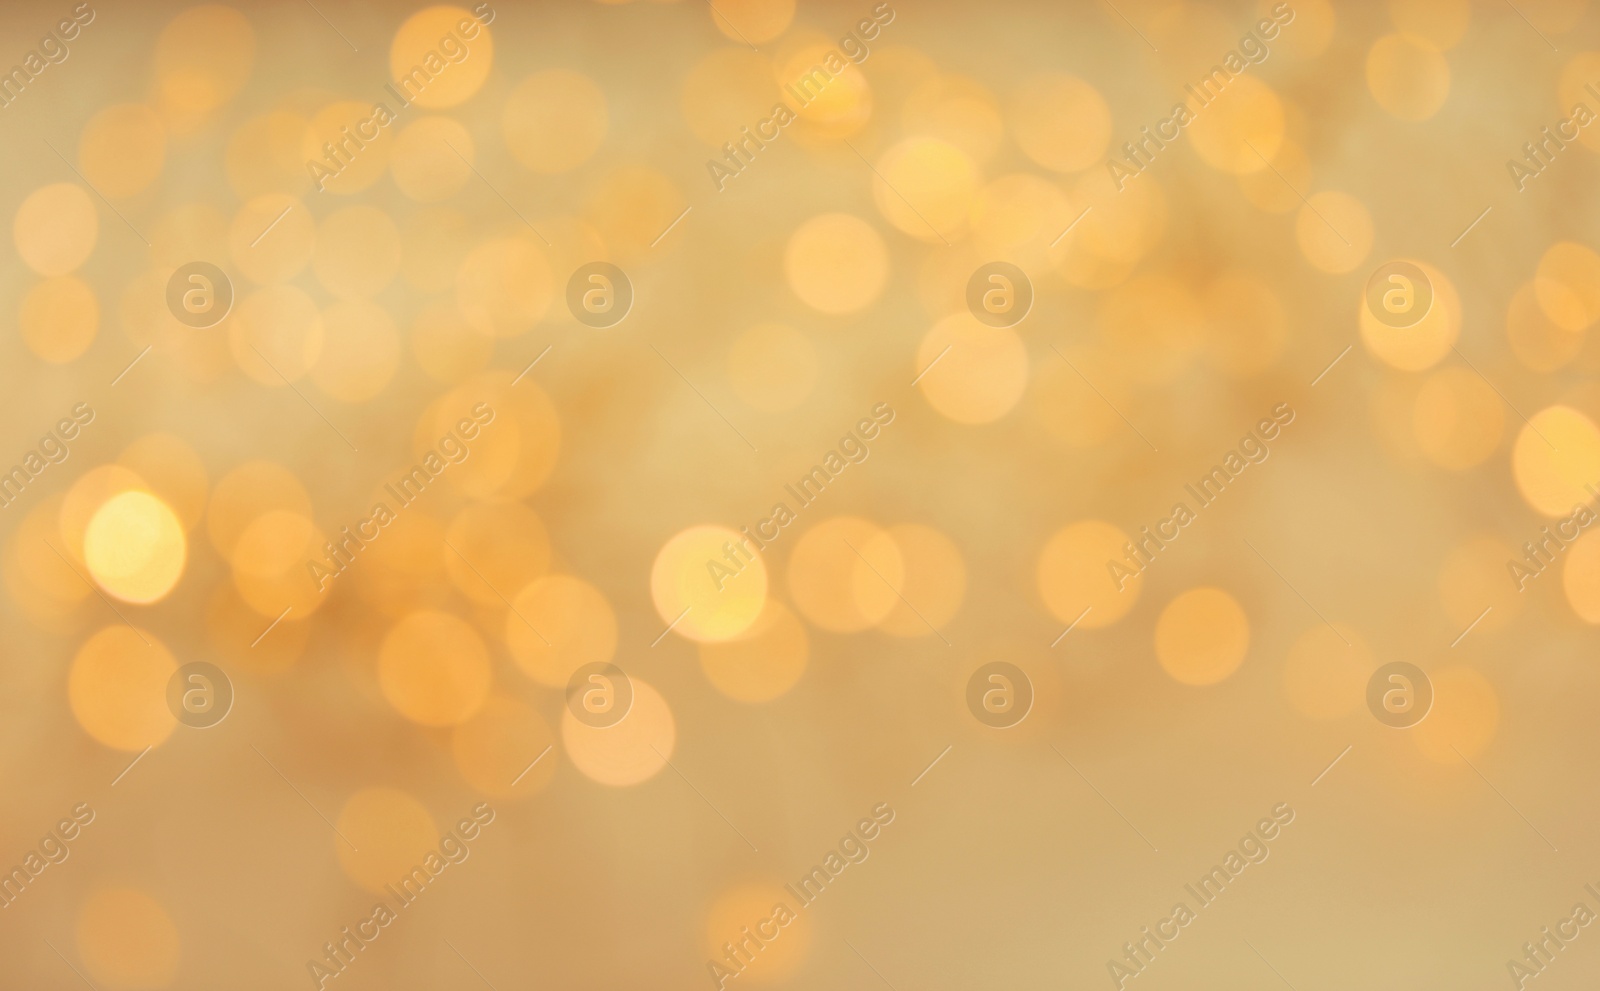 Photo of Gold glitter with bokeh effect on light background